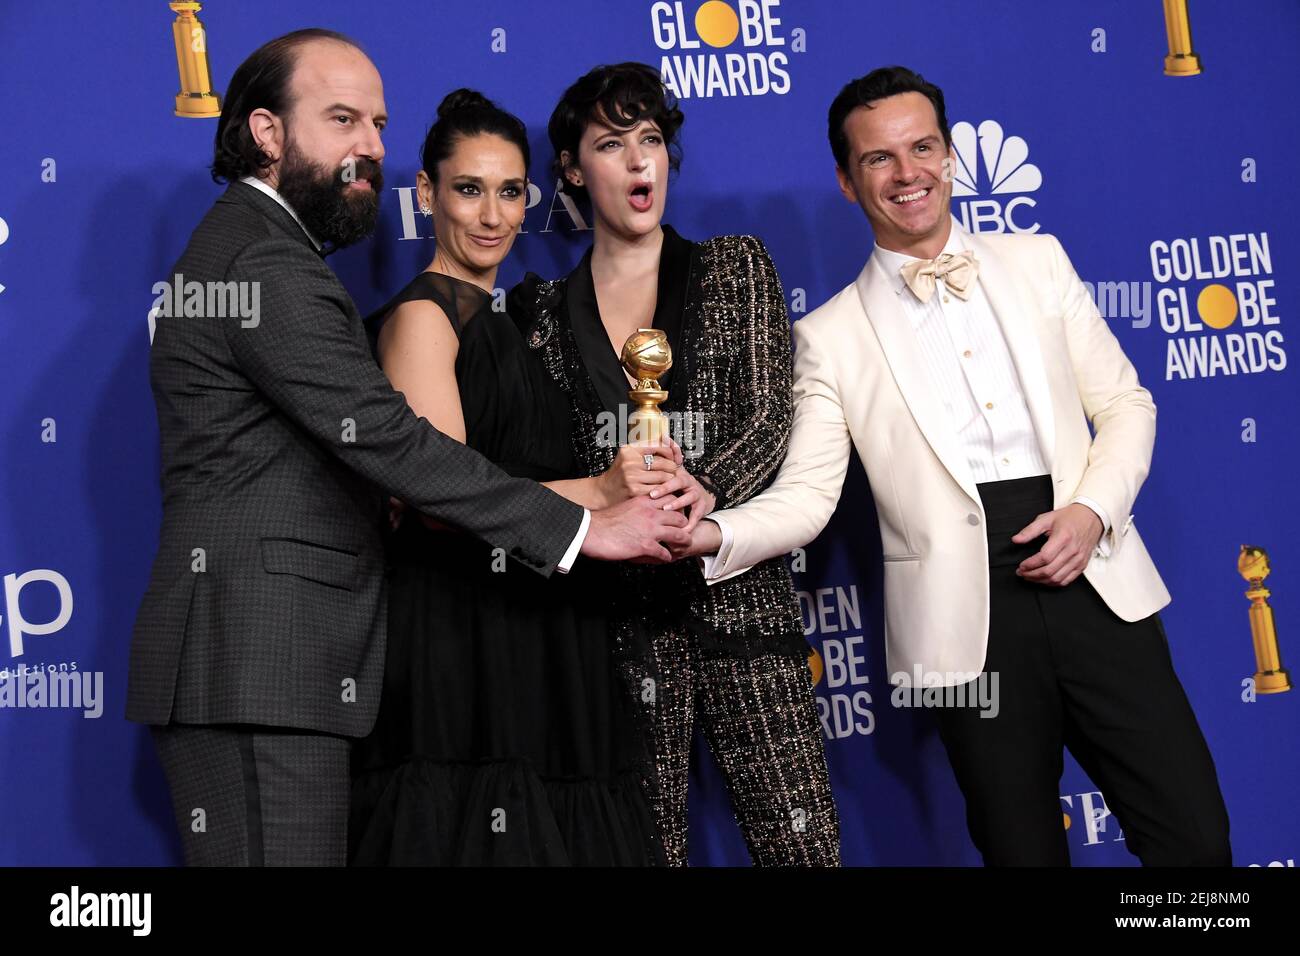 Members of the cast of "Fleabag" winners of the Brett Gelman, Sian  Clifford, Phoebe Waller-Bridge and Andrew Scott in the press room at the  77th Golden Globe Awards held at The Beverly